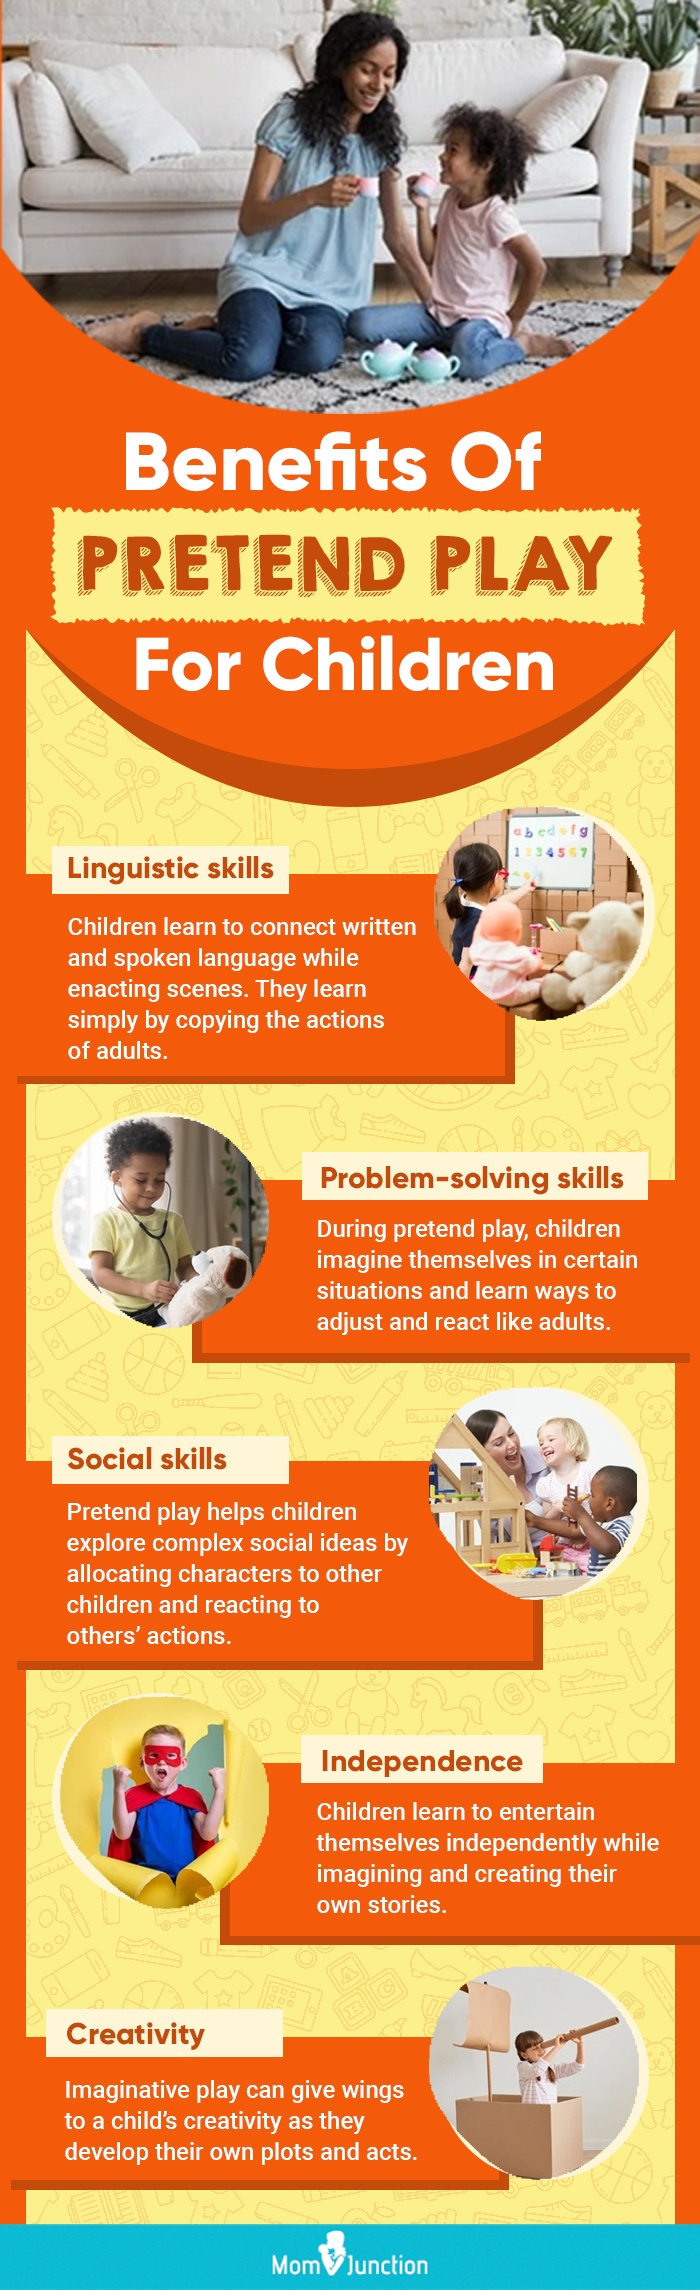 benefits of pretend play for children (infographic)